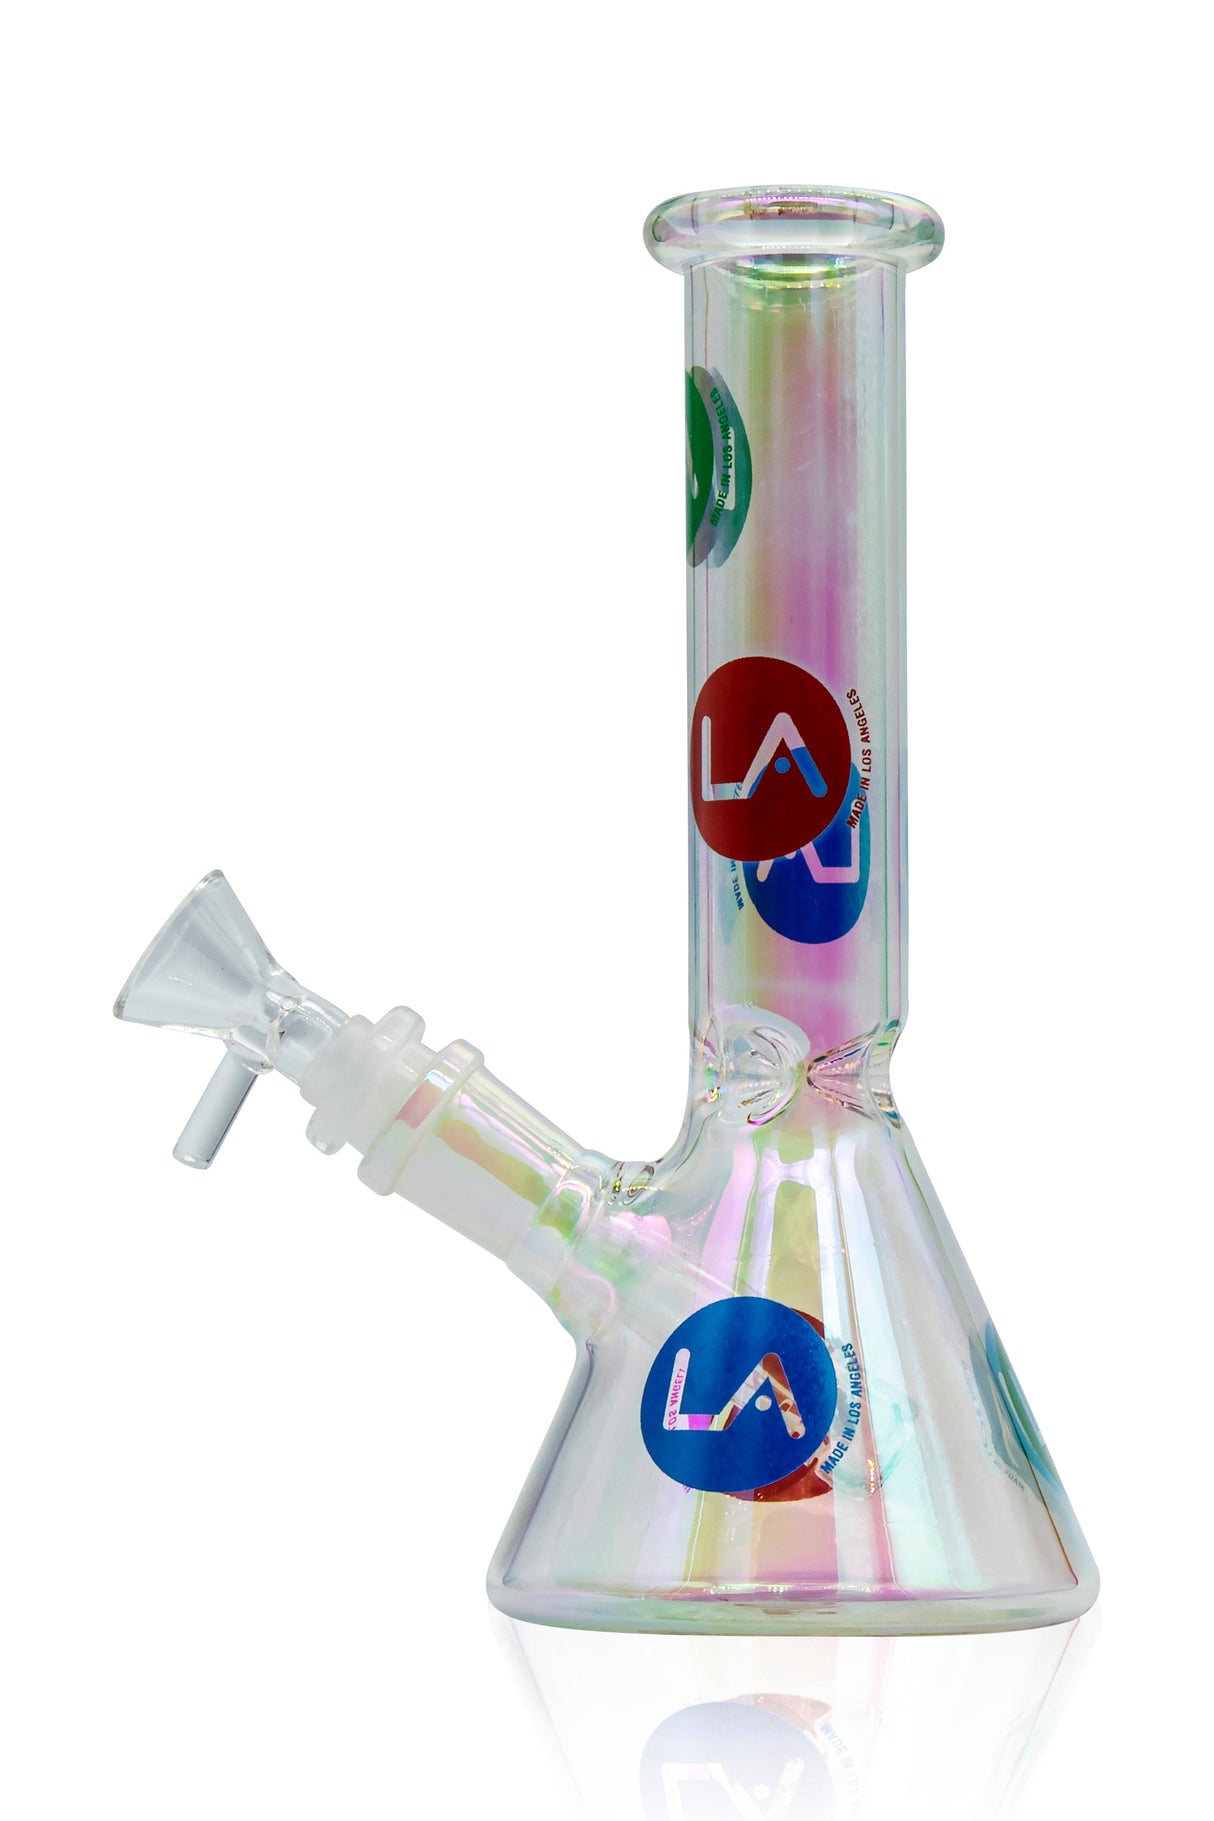 LA Pipes Disco Beaker Bong in Champagne Glass Design with Borosilicate Glass, Front View